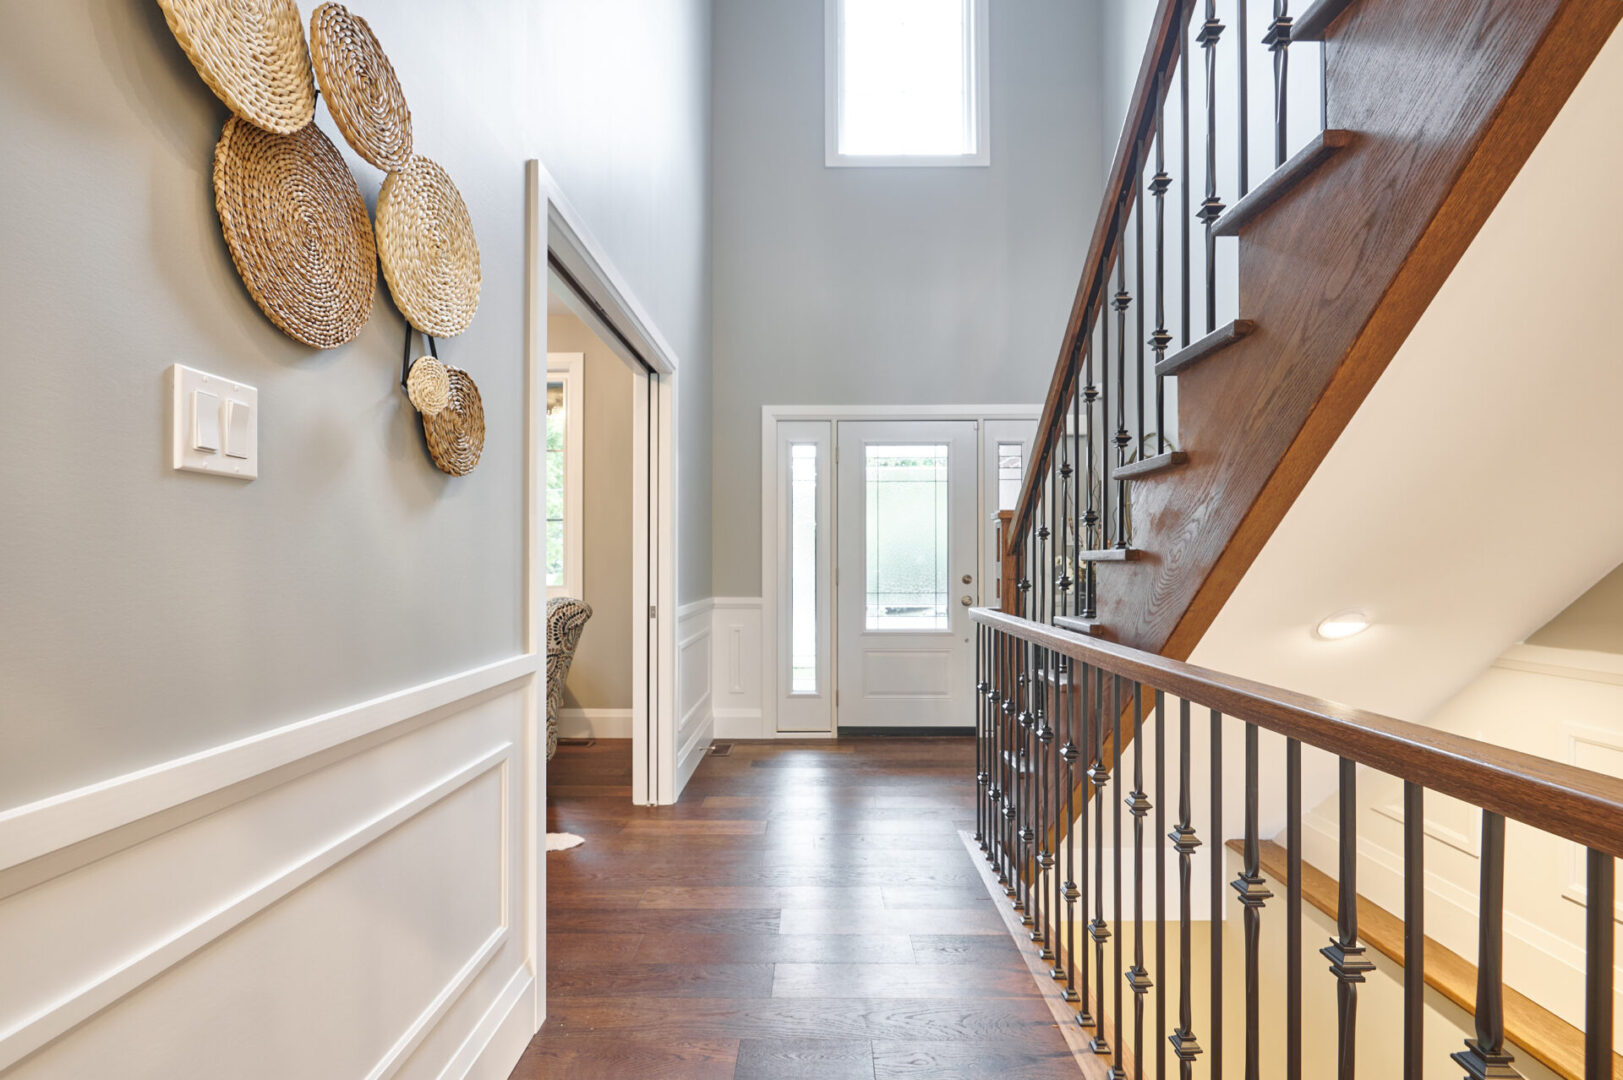 A hallway with a wooden floor and metal railing.